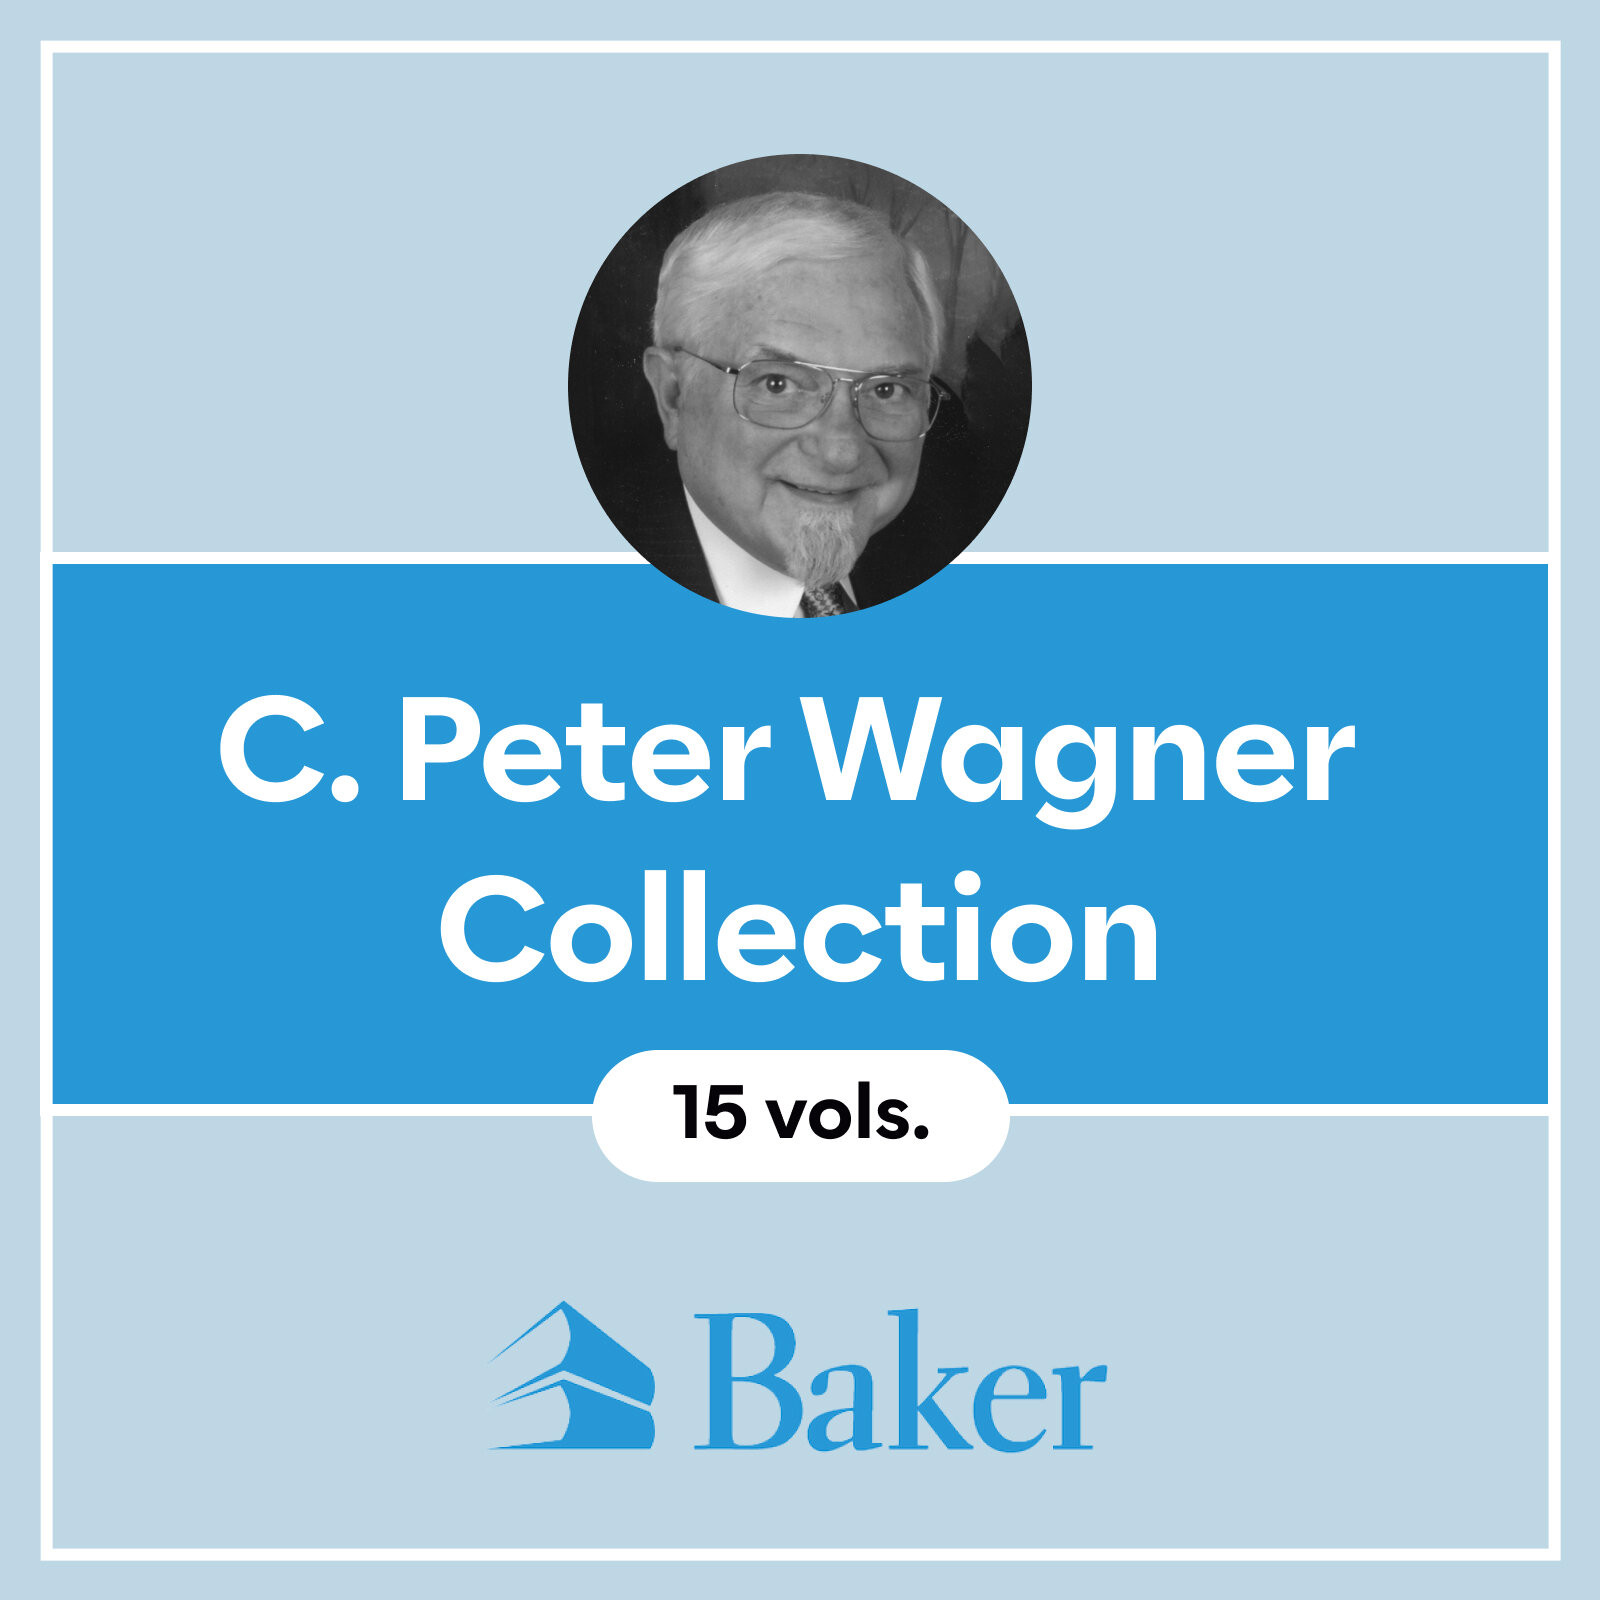 C. Peter Wagner Collection (15 vols.)